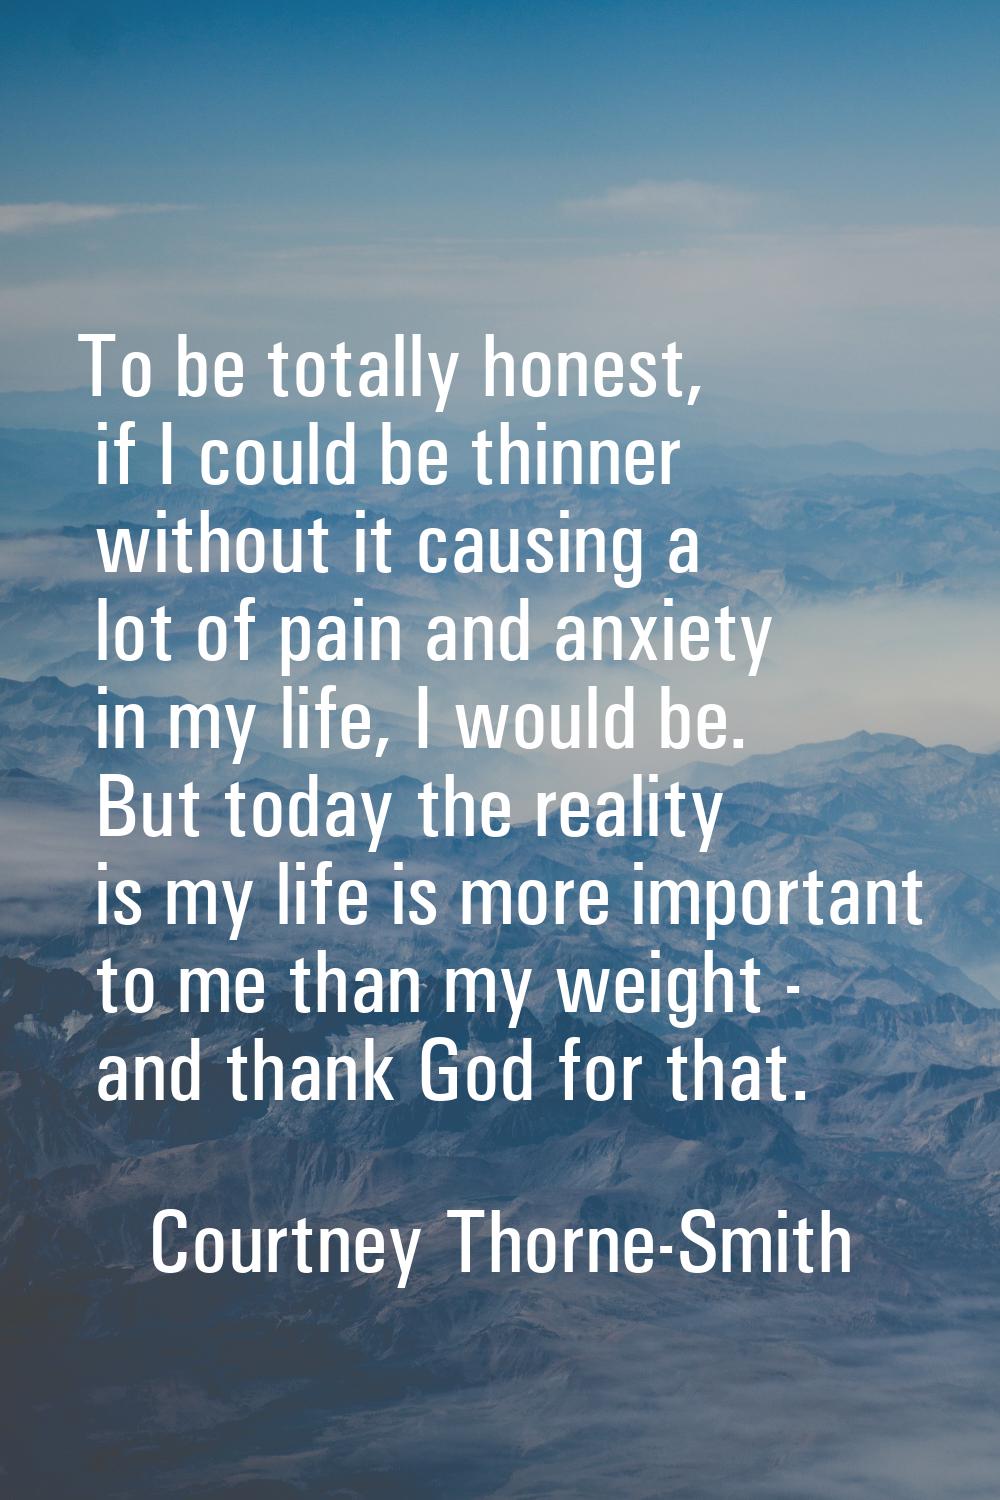 To be totally honest, if I could be thinner without it causing a lot of pain and anxiety in my life